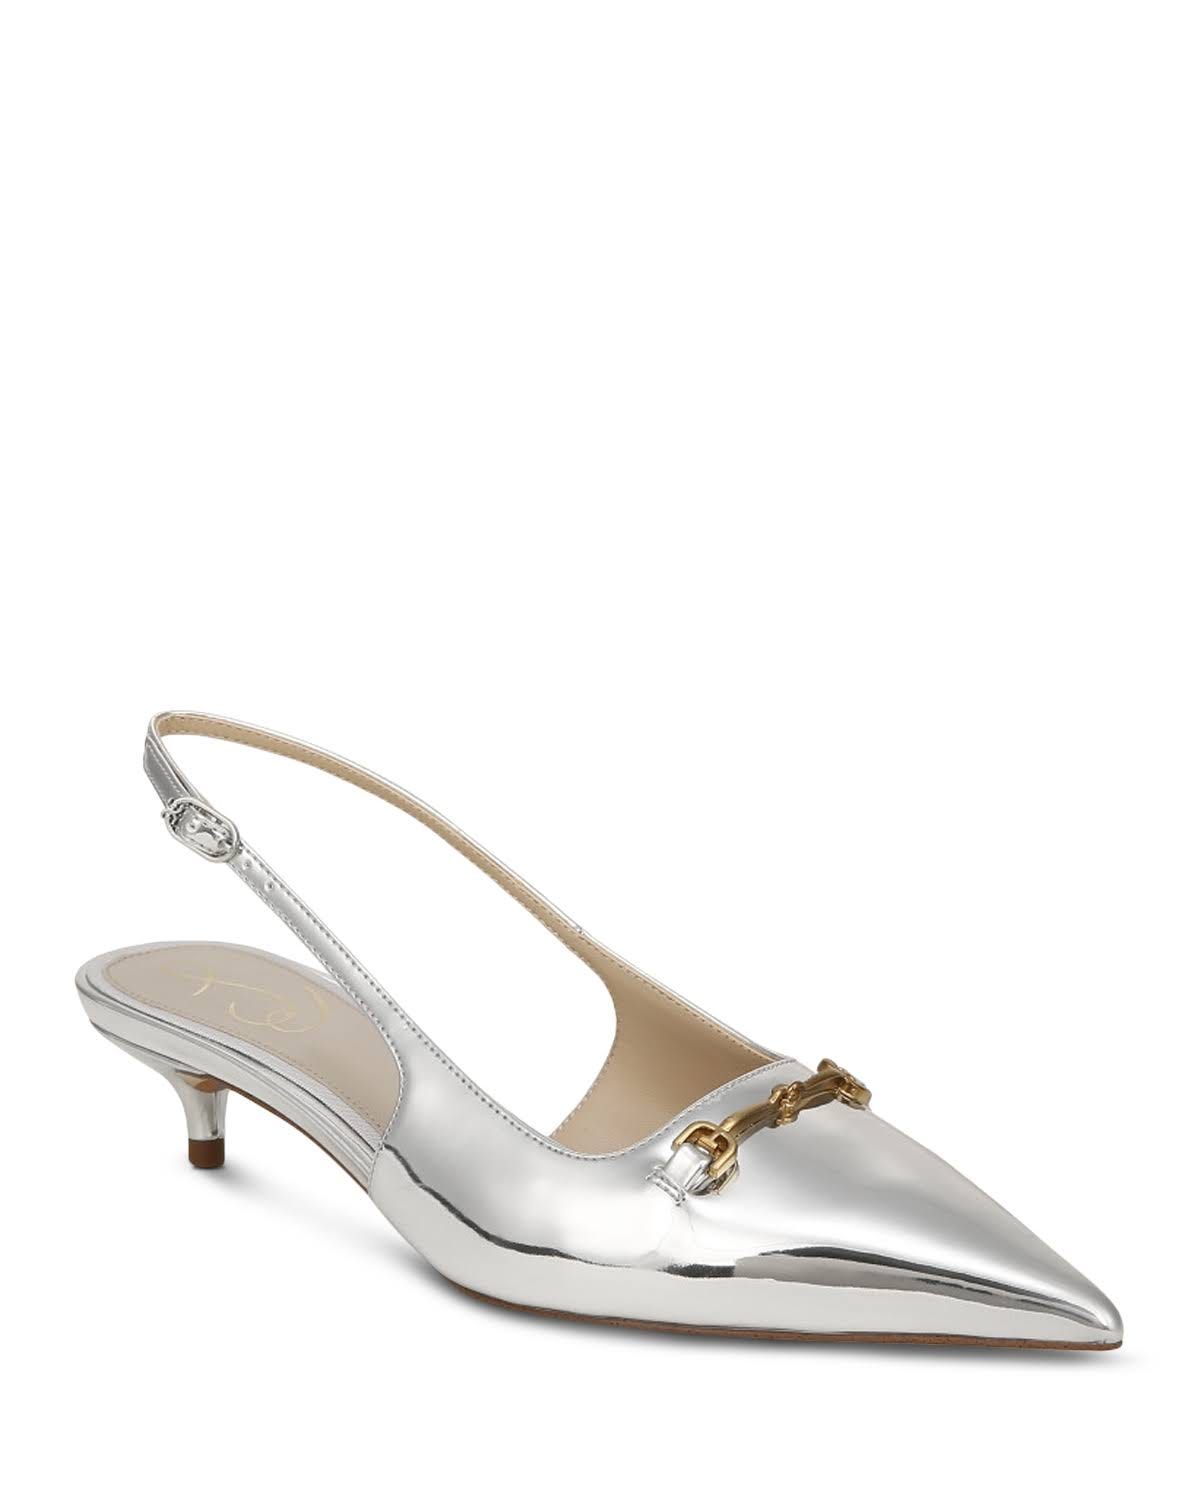 Silver Slingback Shoes with Petite Kitten Heel | Image